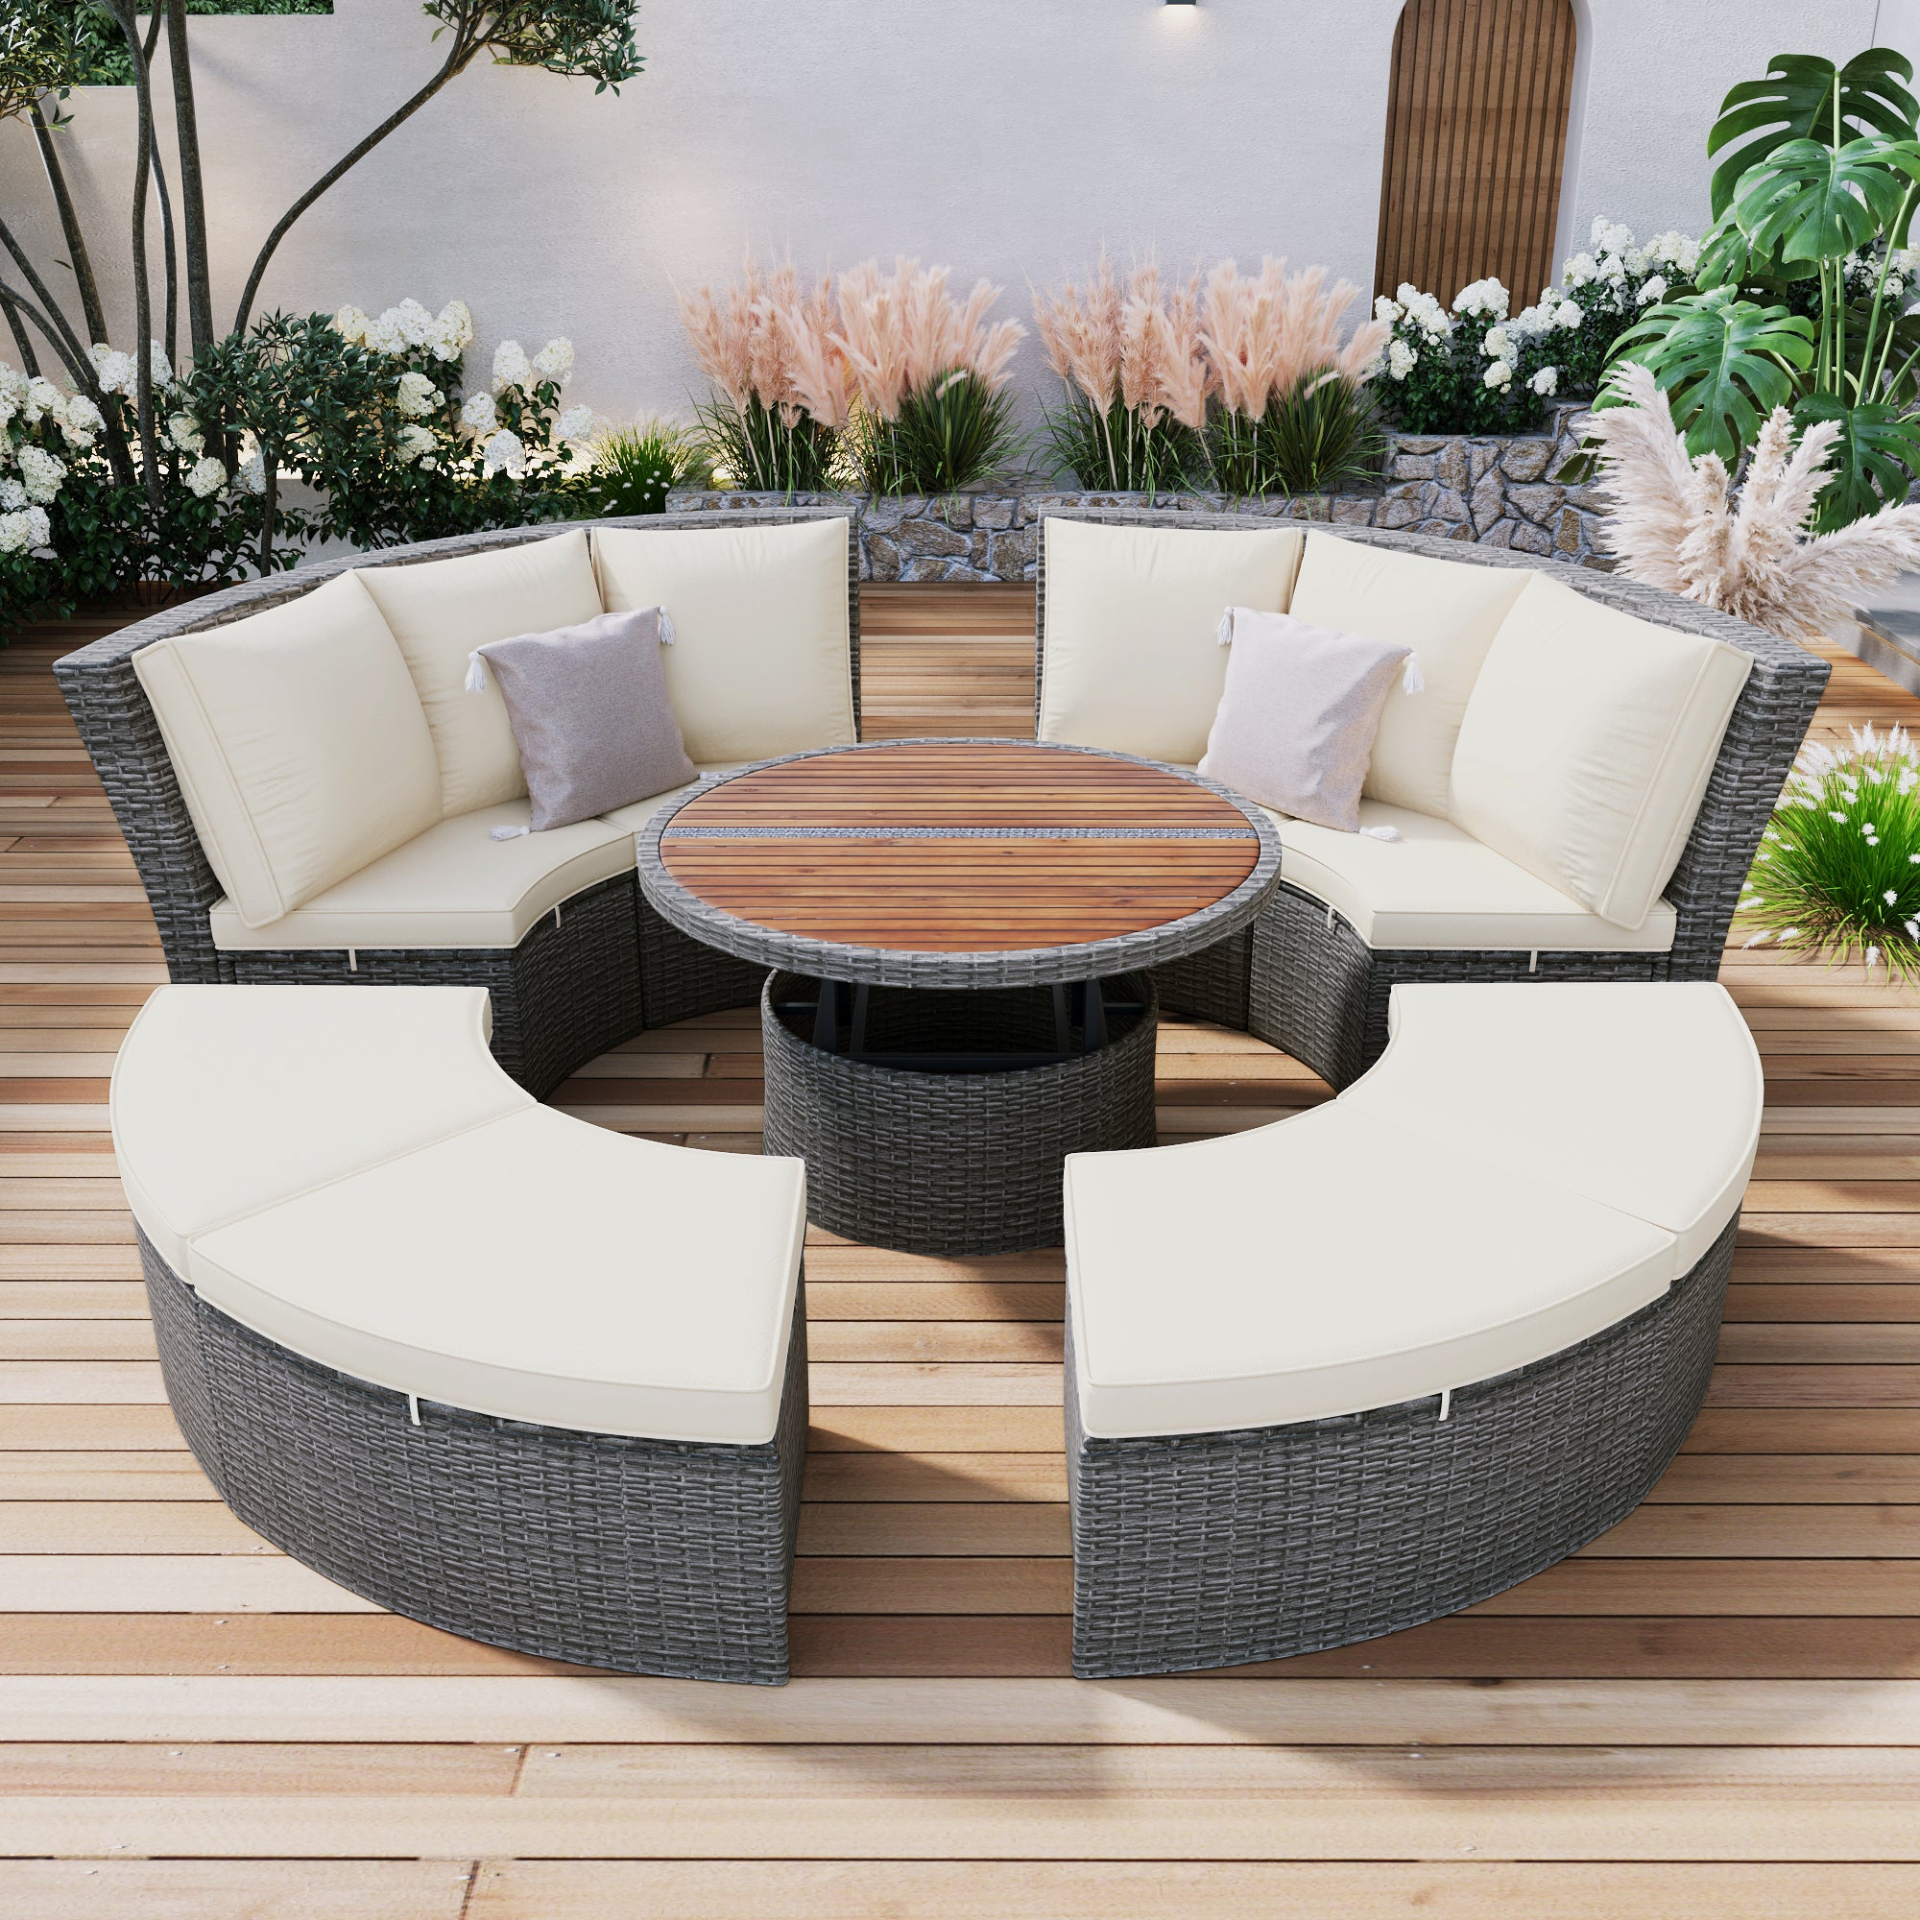 Patio 5-Piece Round Rattan Sectional Sofa Set All-Weather PE Wicker Sunbed Daybed with Round Liftable Table and Washable Cushions for Outdoor Backyard Poolside, Beige Môdern Space Gallery